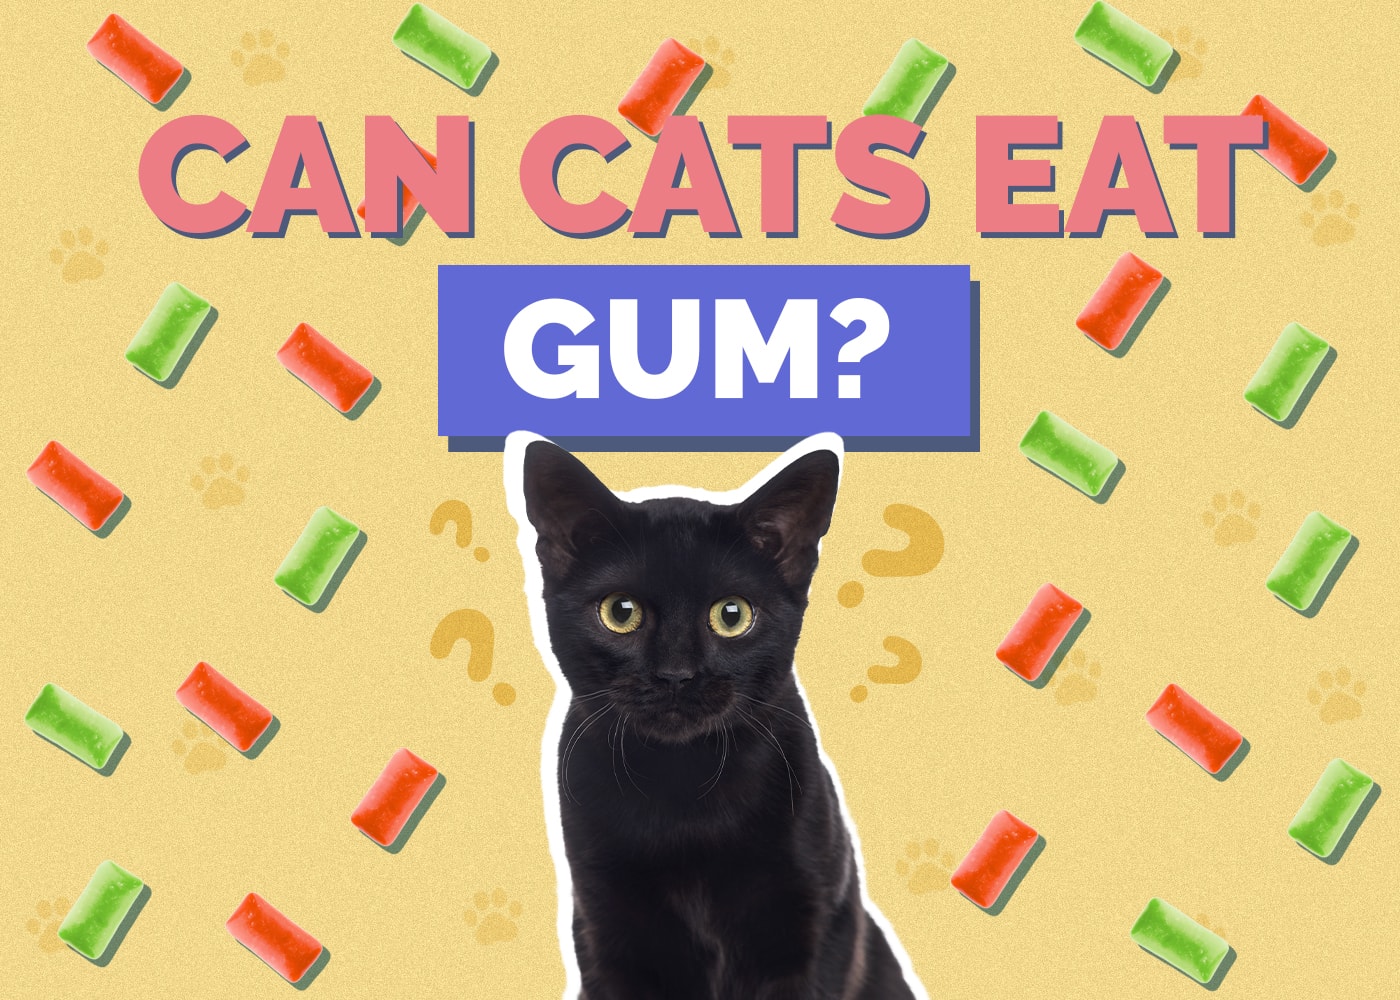 Can Cats Eat gum